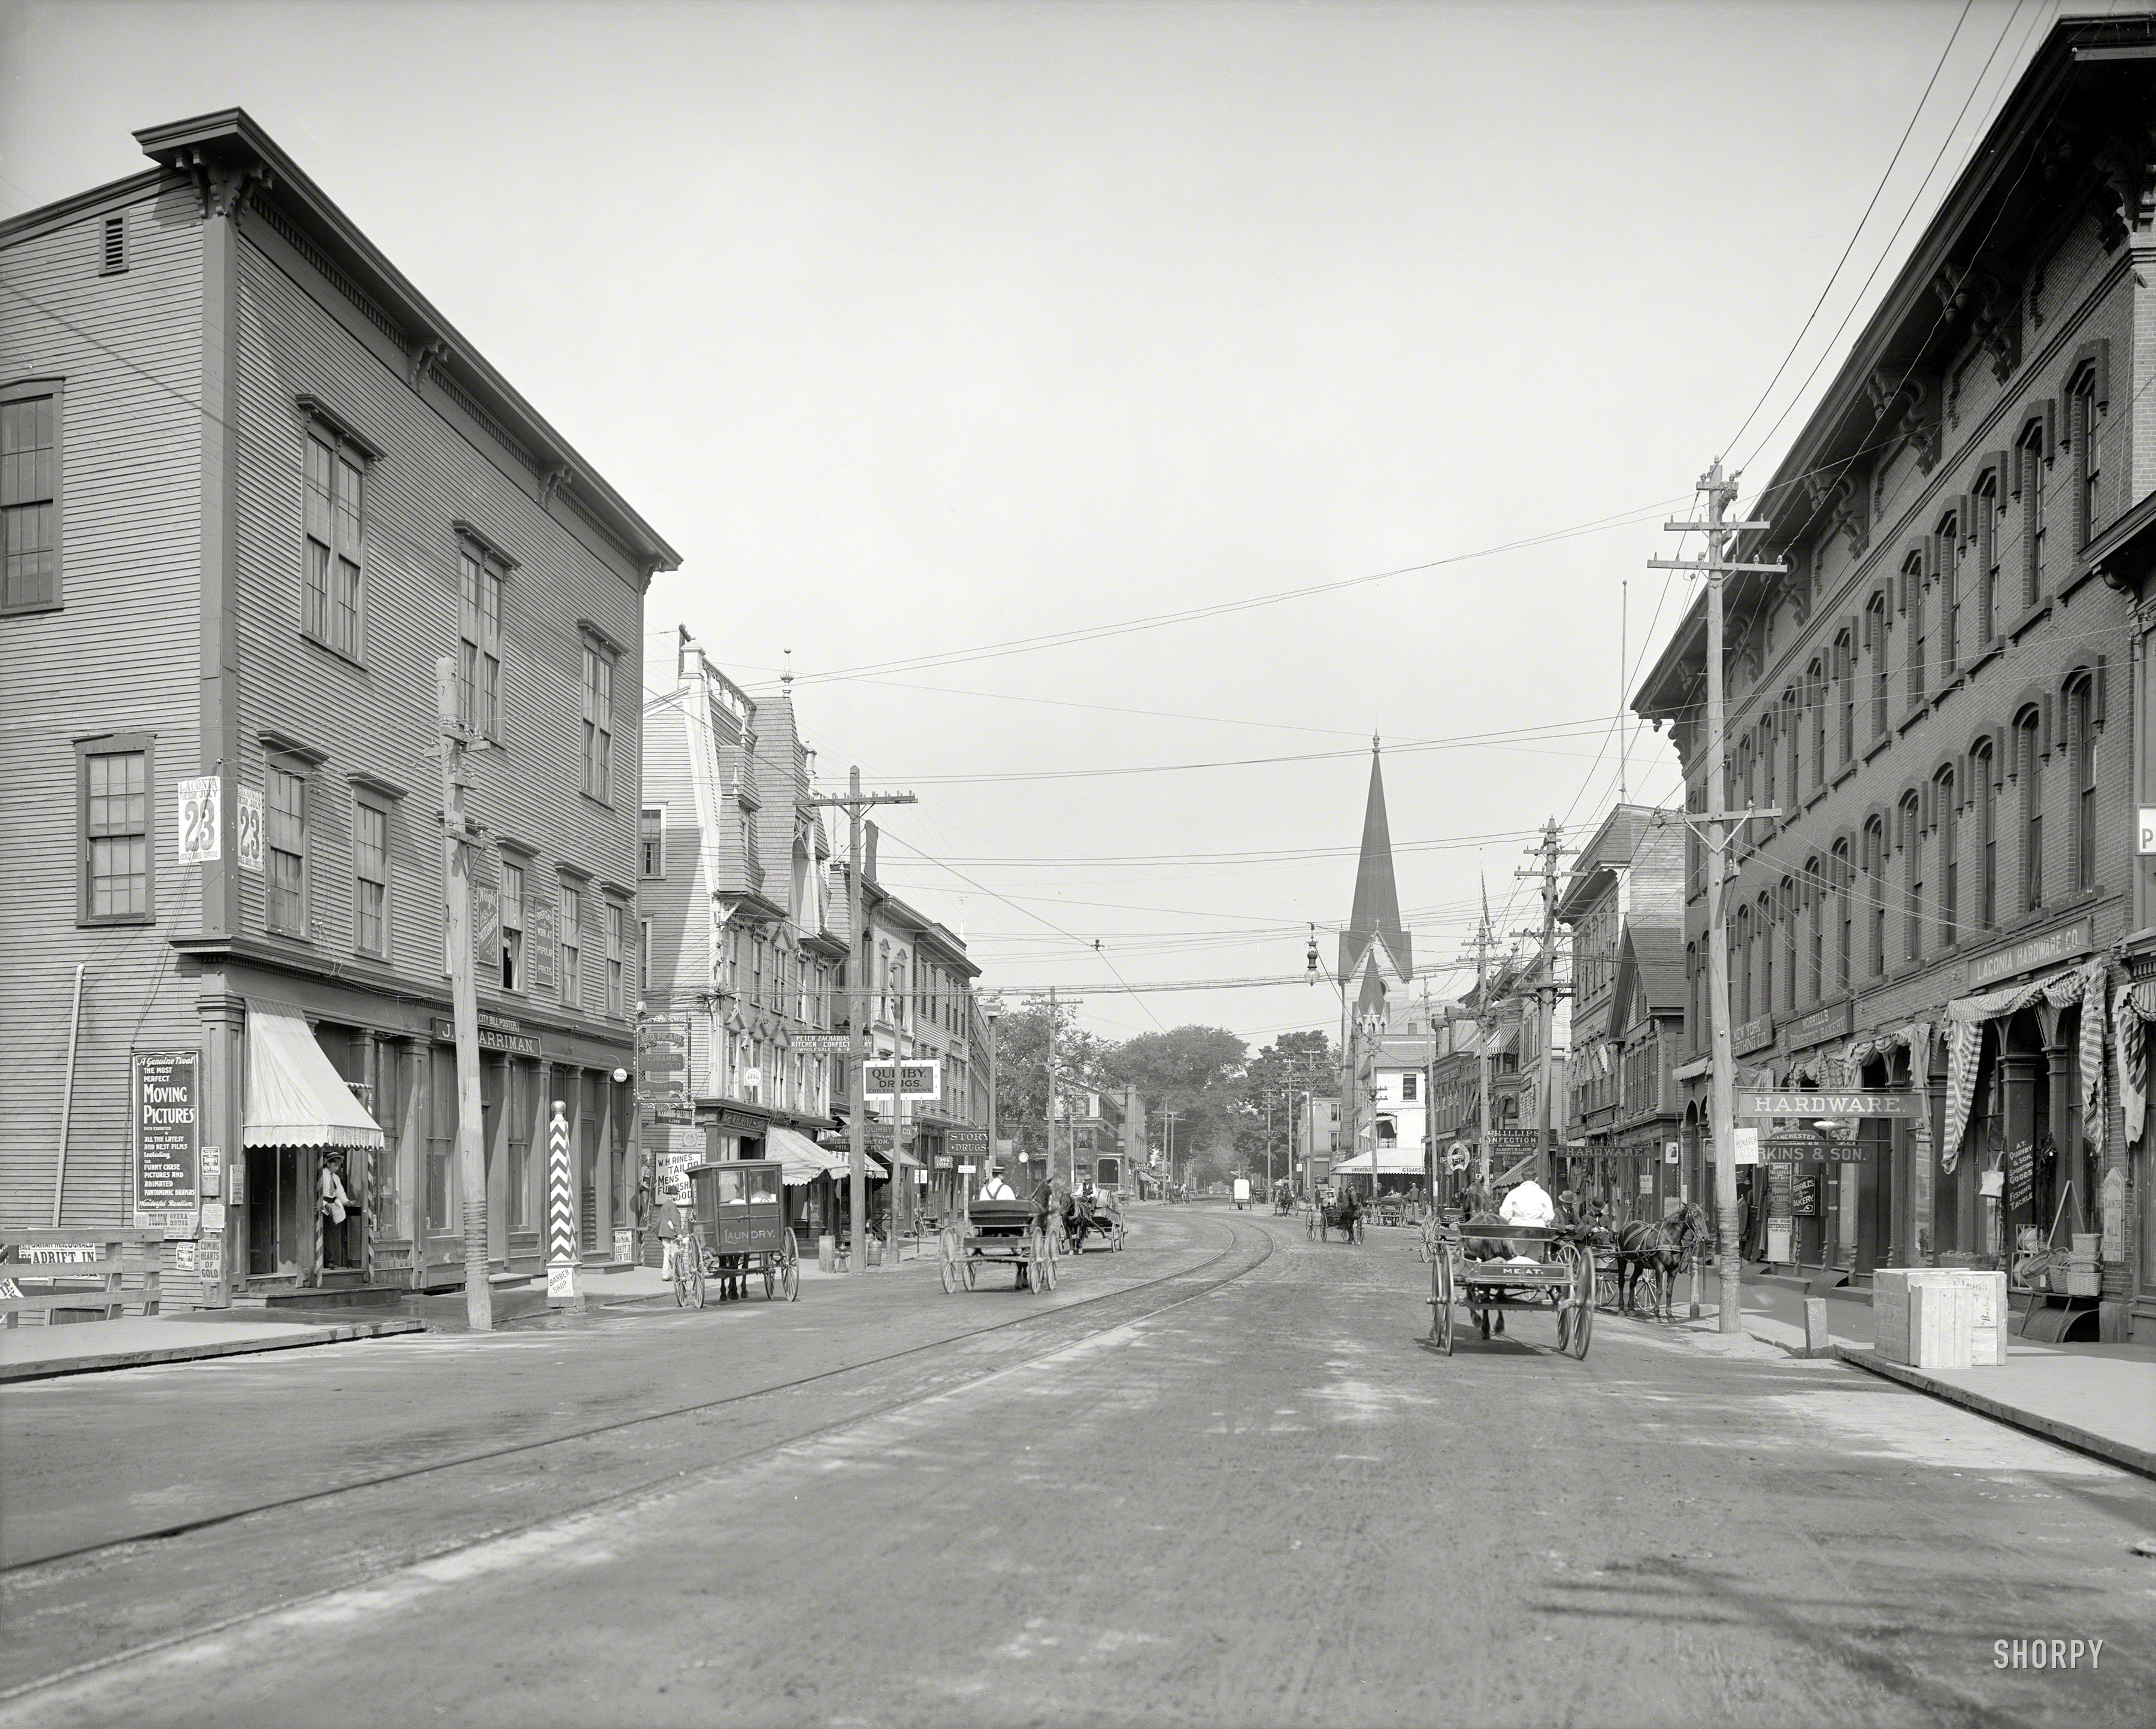 Circa 1907. "Laconia, New Hampshire -- Main Street." A highlight here is the handbill advertising "the most perfect moving pictures" and "animated pantomimic dramas" at the Folsom Opera House. View full size.